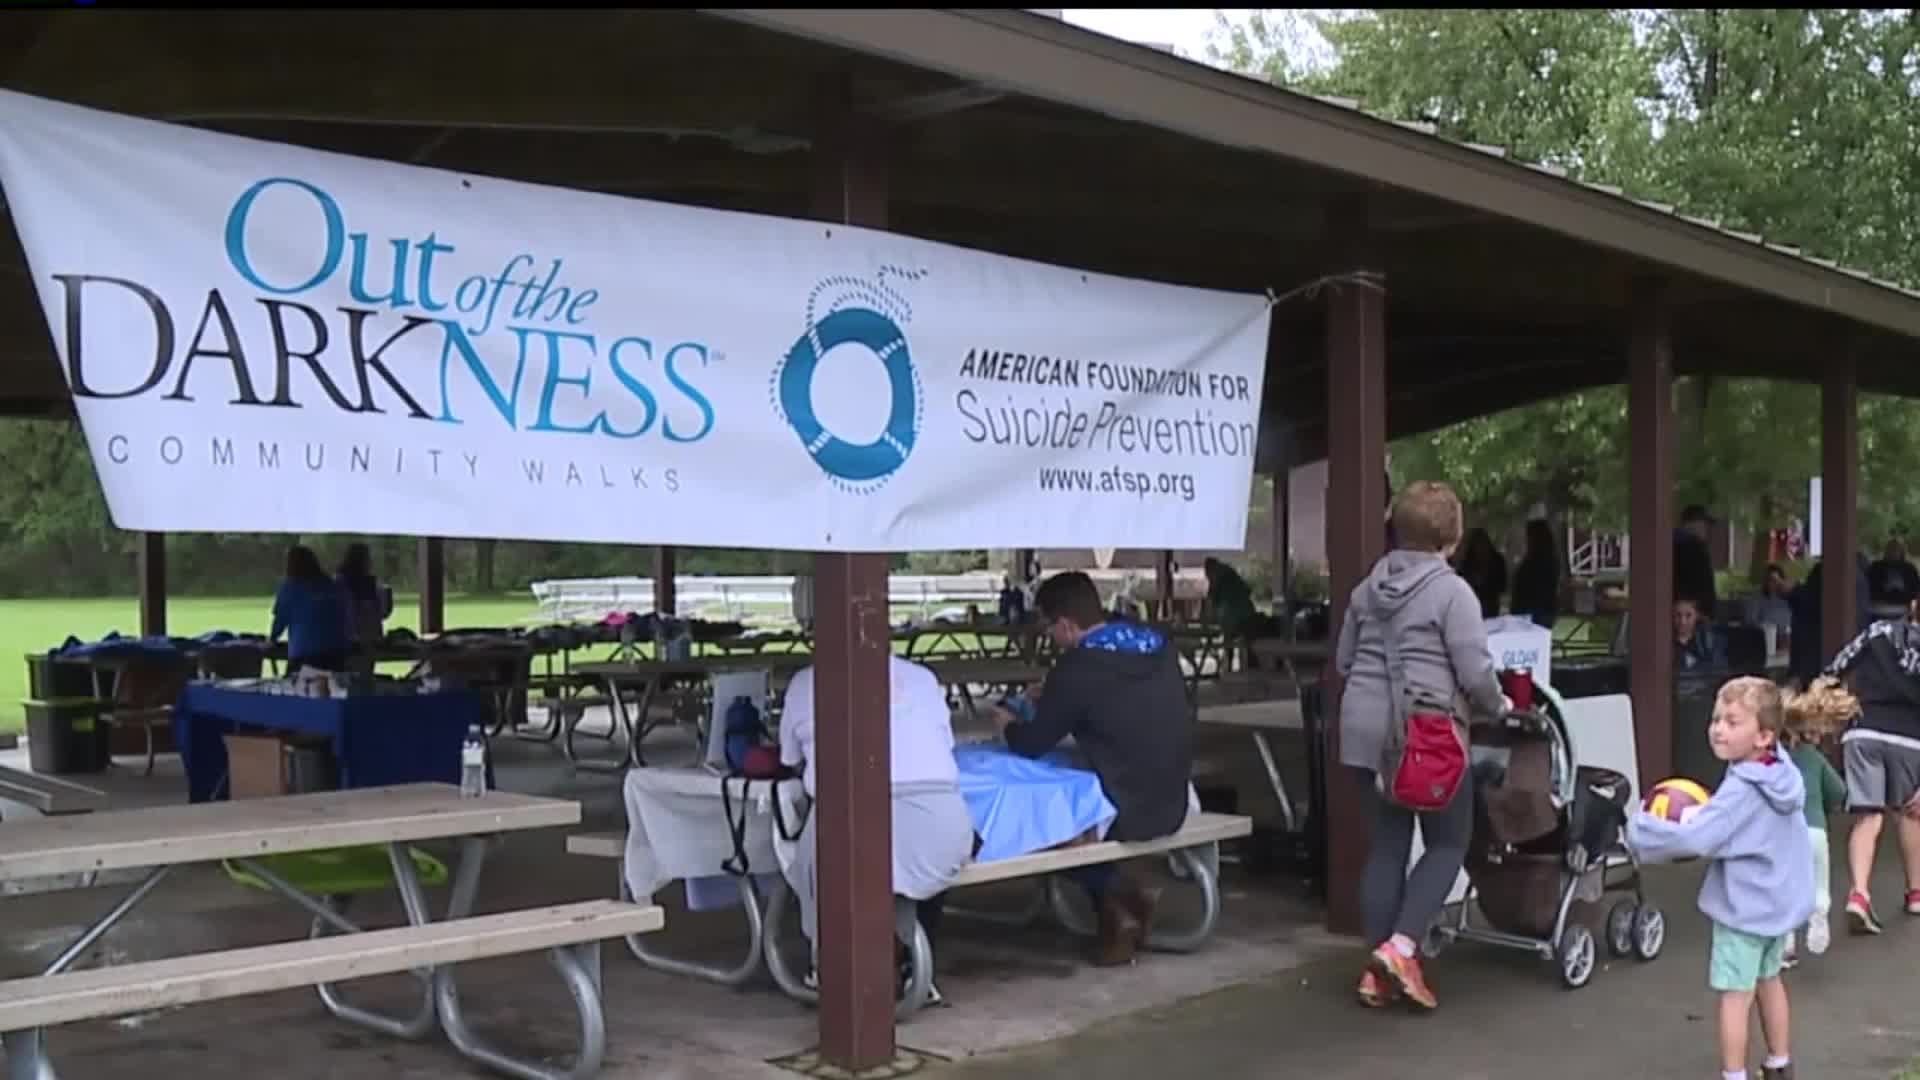 "Out of the Darkness" walk raises awareness for rising suicide concerns